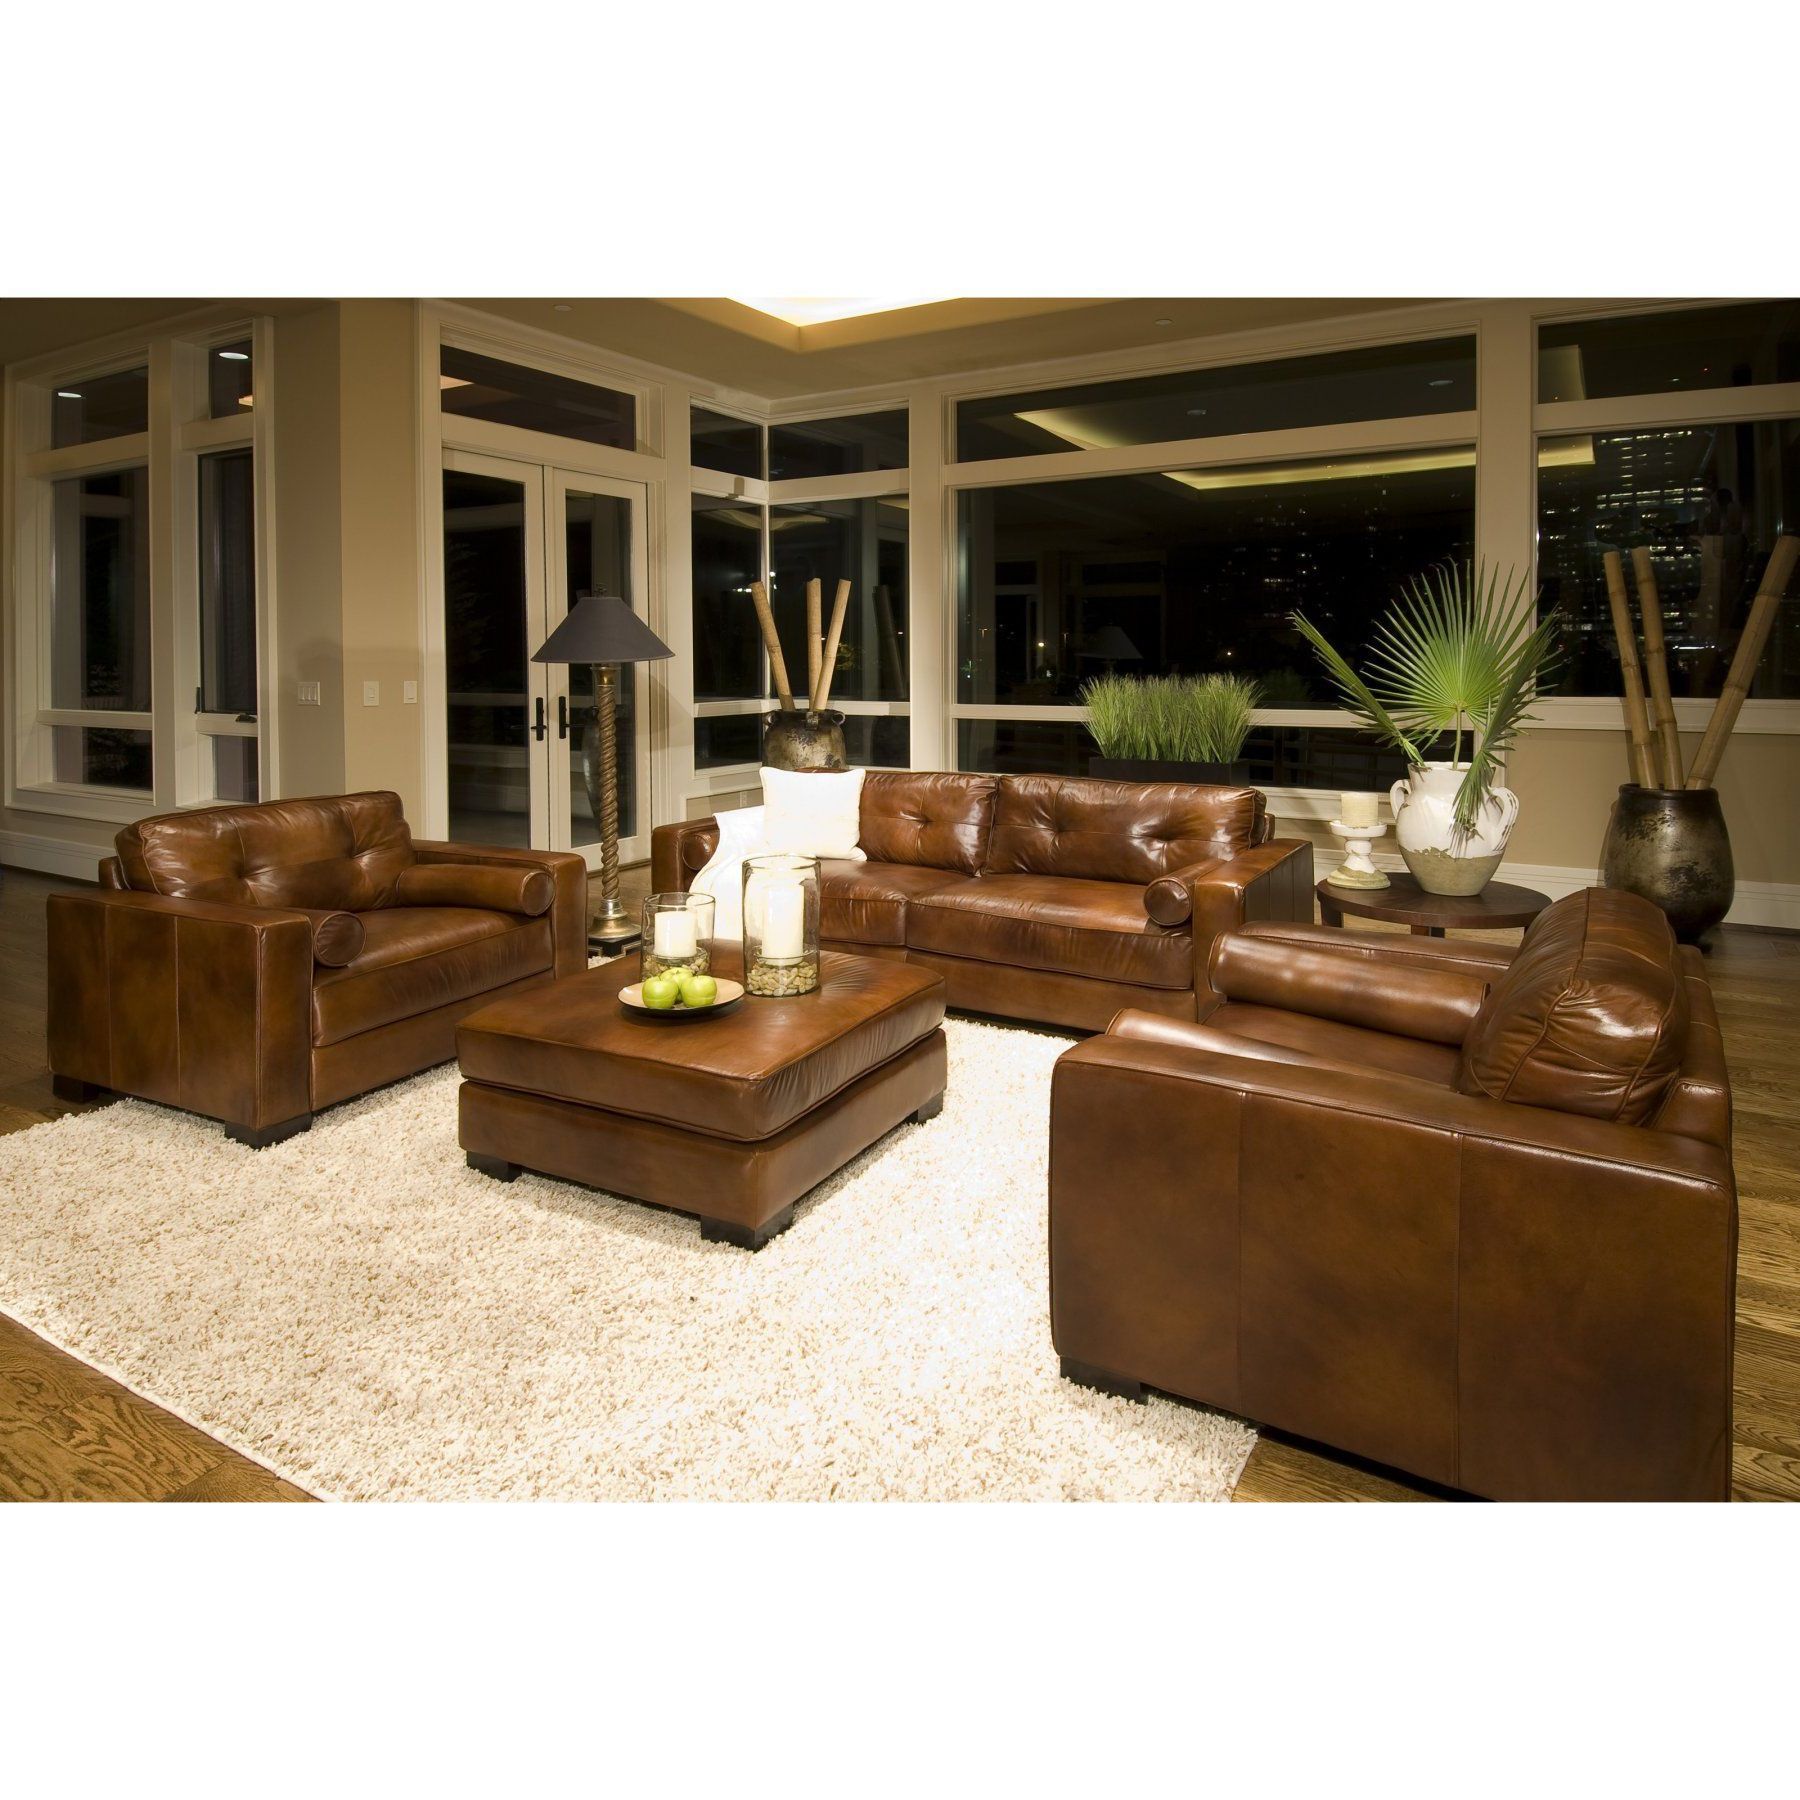 Soho 4 Piece Top Grain Leather Collection In Rustic Including 1 Sofa, 2 Within Trendy Rustic Brown Sectional Corner Desks (View 1 of 15)